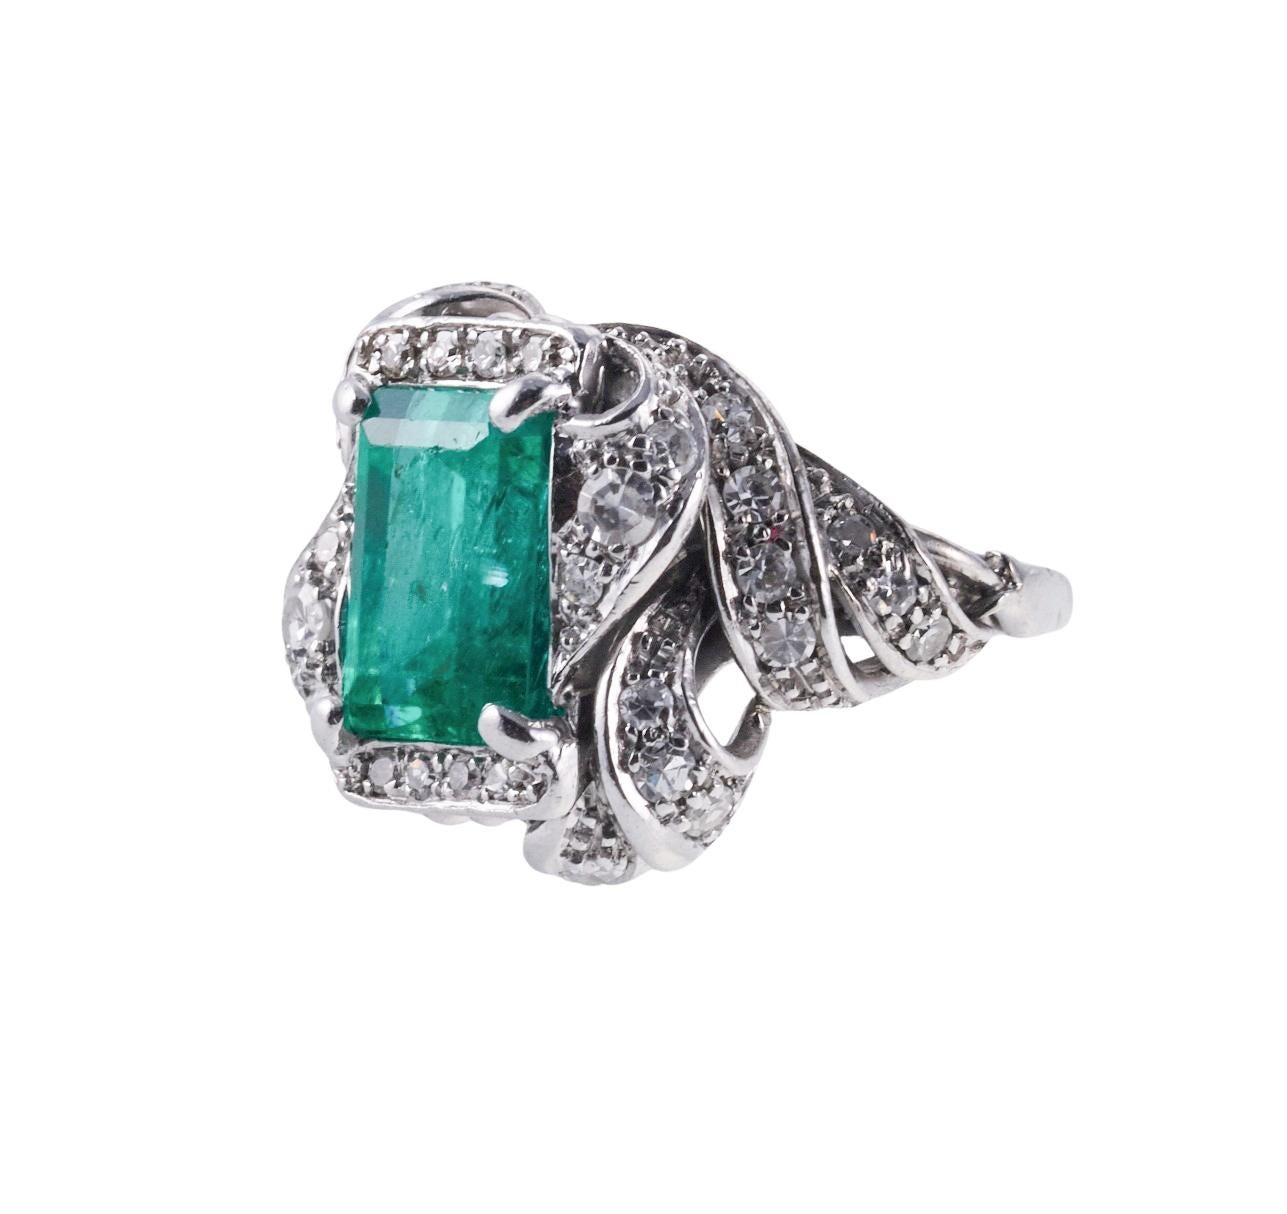 Midcentury 4.77 Carat Emerald Diamond Gold Cocktail Ring In Excellent Condition For Sale In New York, NY